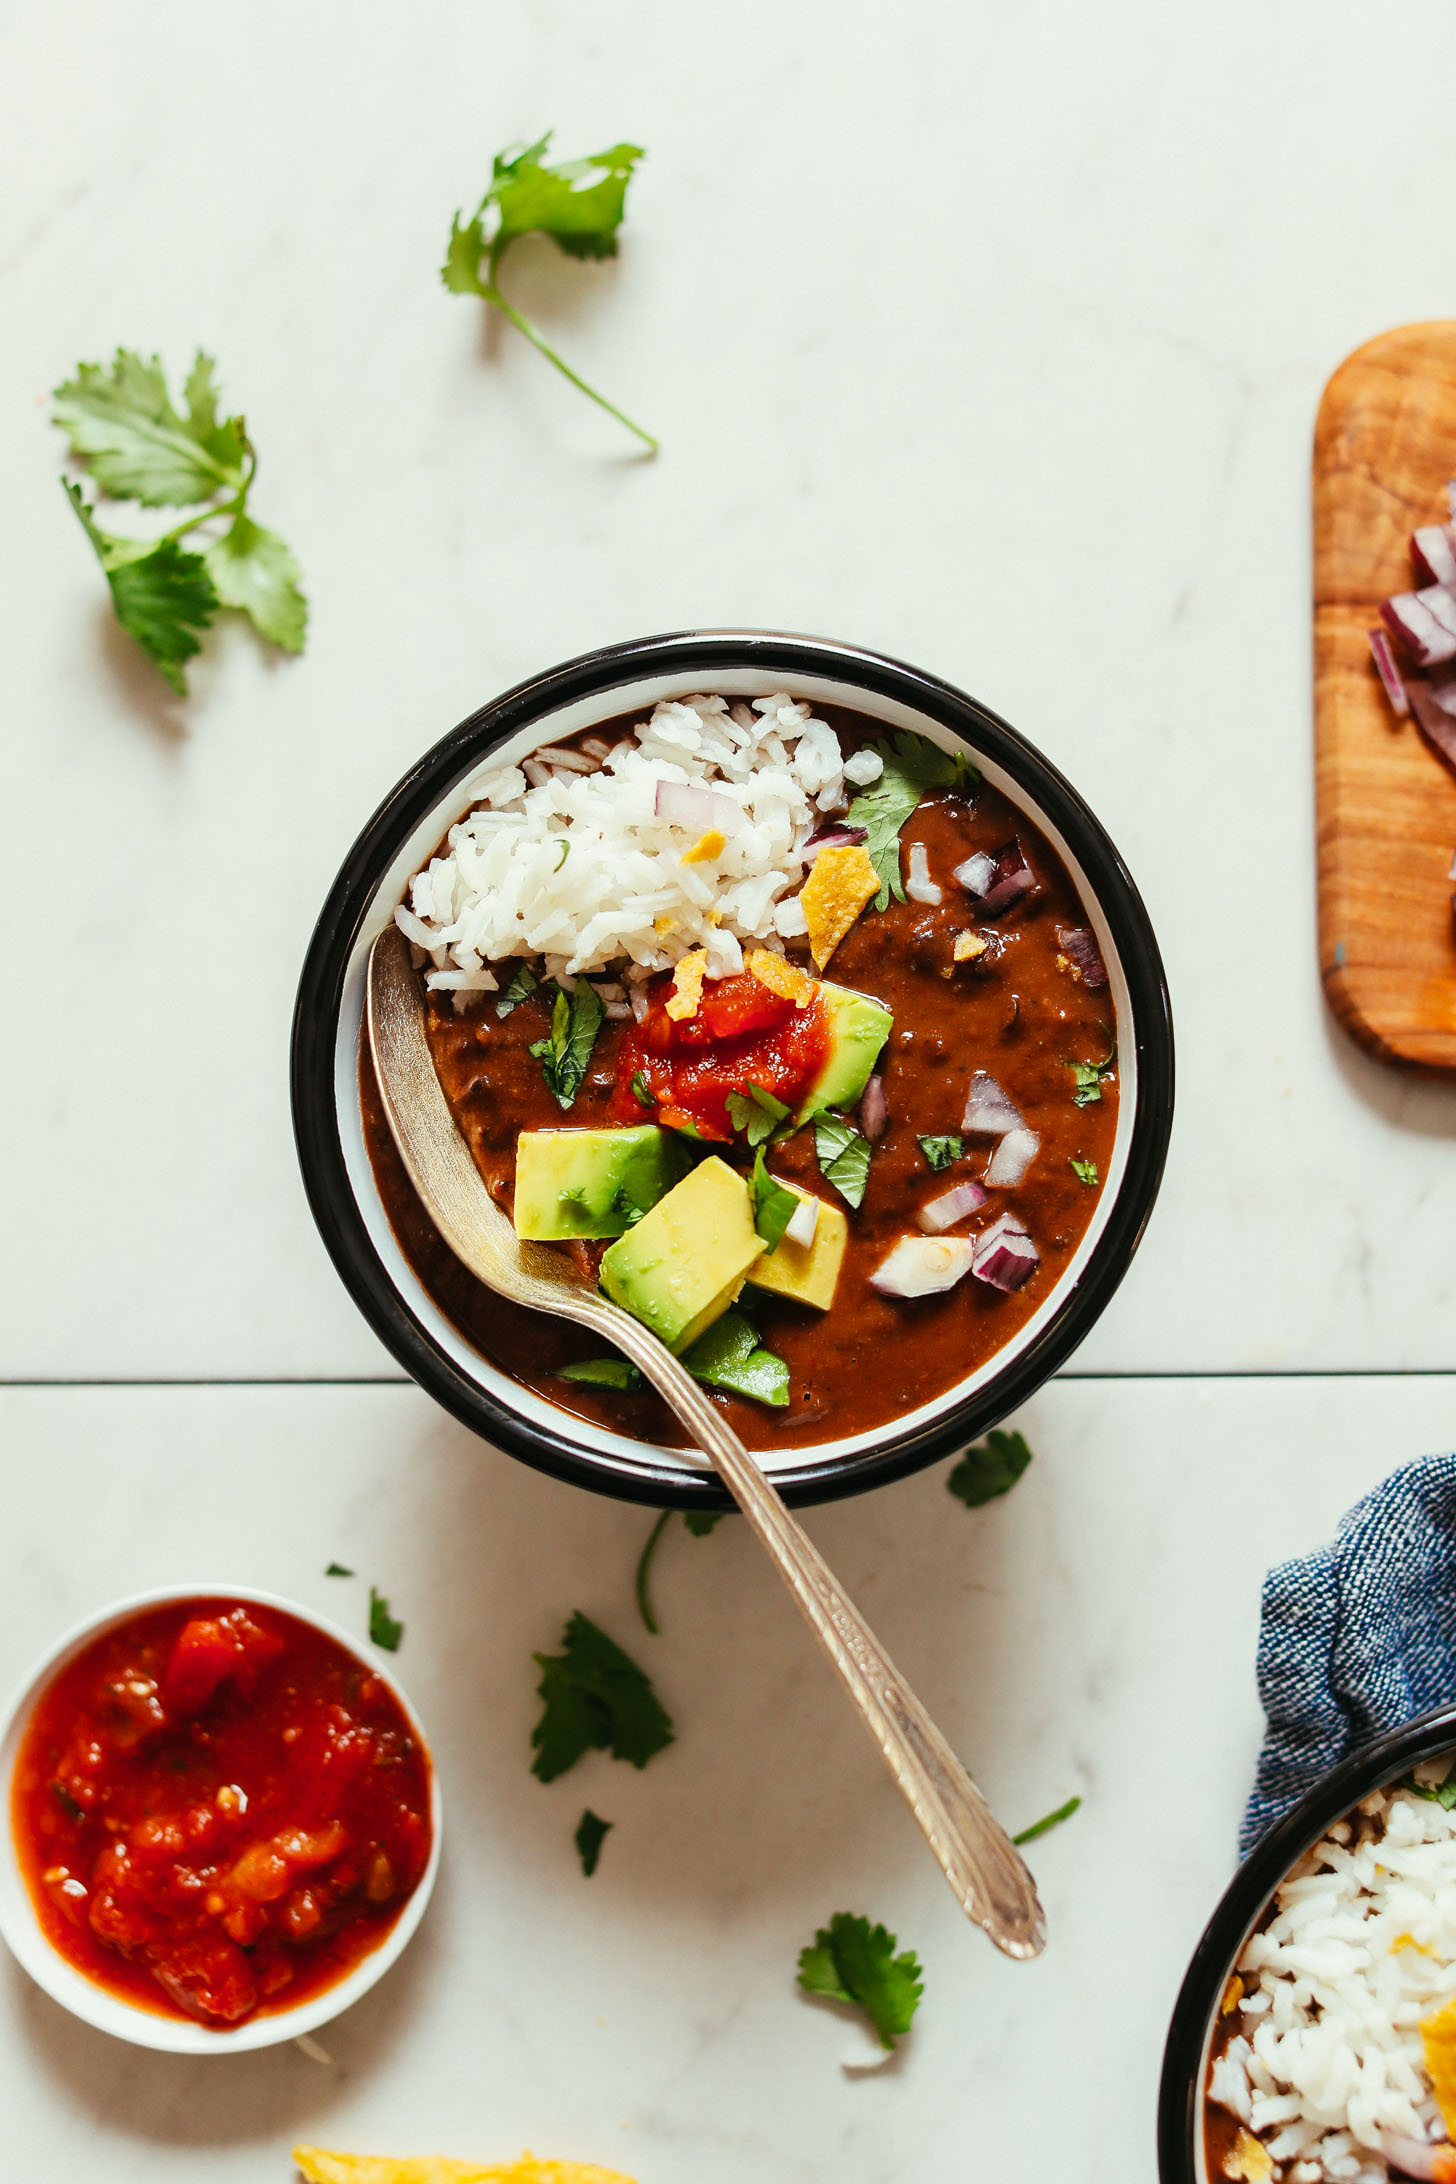 Overhead image of black bean soup in a black bowl with a spoon resting in the bowl, garnished with rice avocado, salsa, and chips